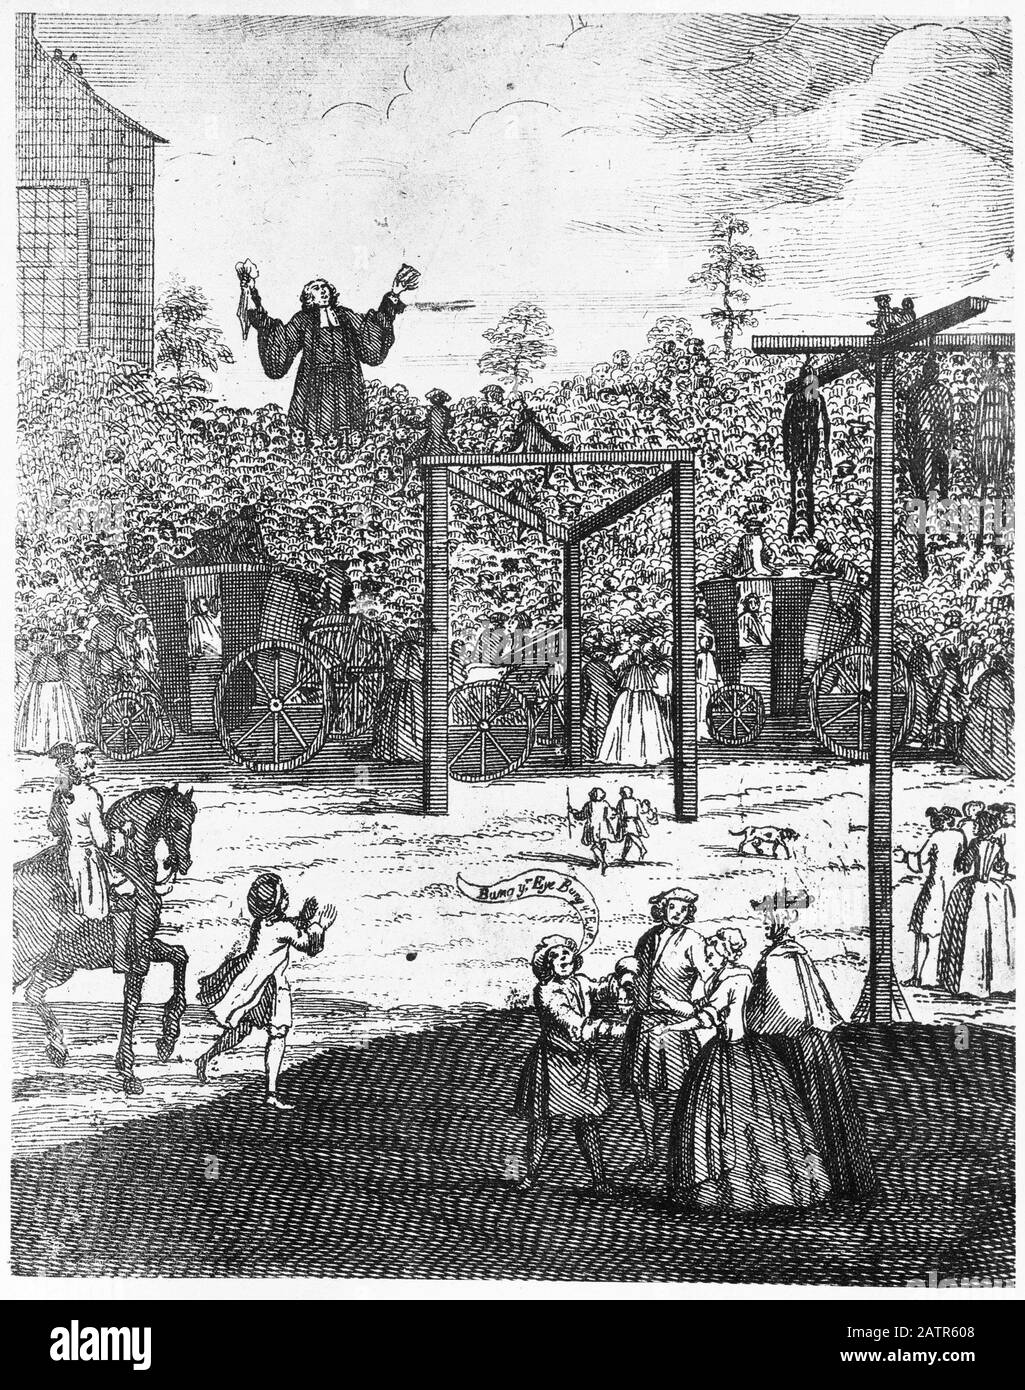 Engraving of George Whitefield preaching at Kensington common. From The Chronicles of Newgate, 1884. Stock Photo